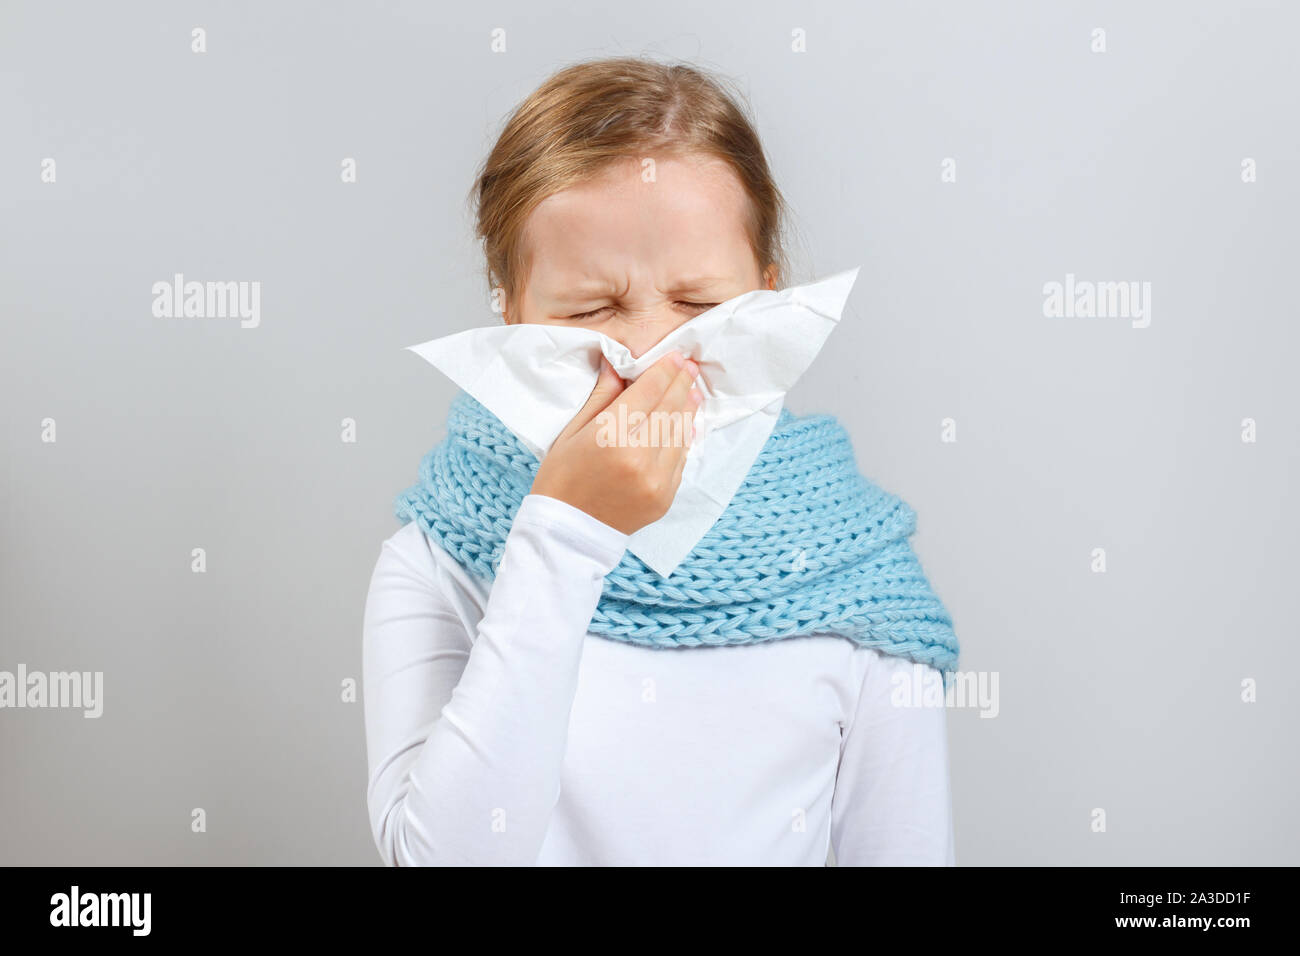 Cold season. Little girl in a warm scarf blows her nose. A child on a gray background. Stock Photo